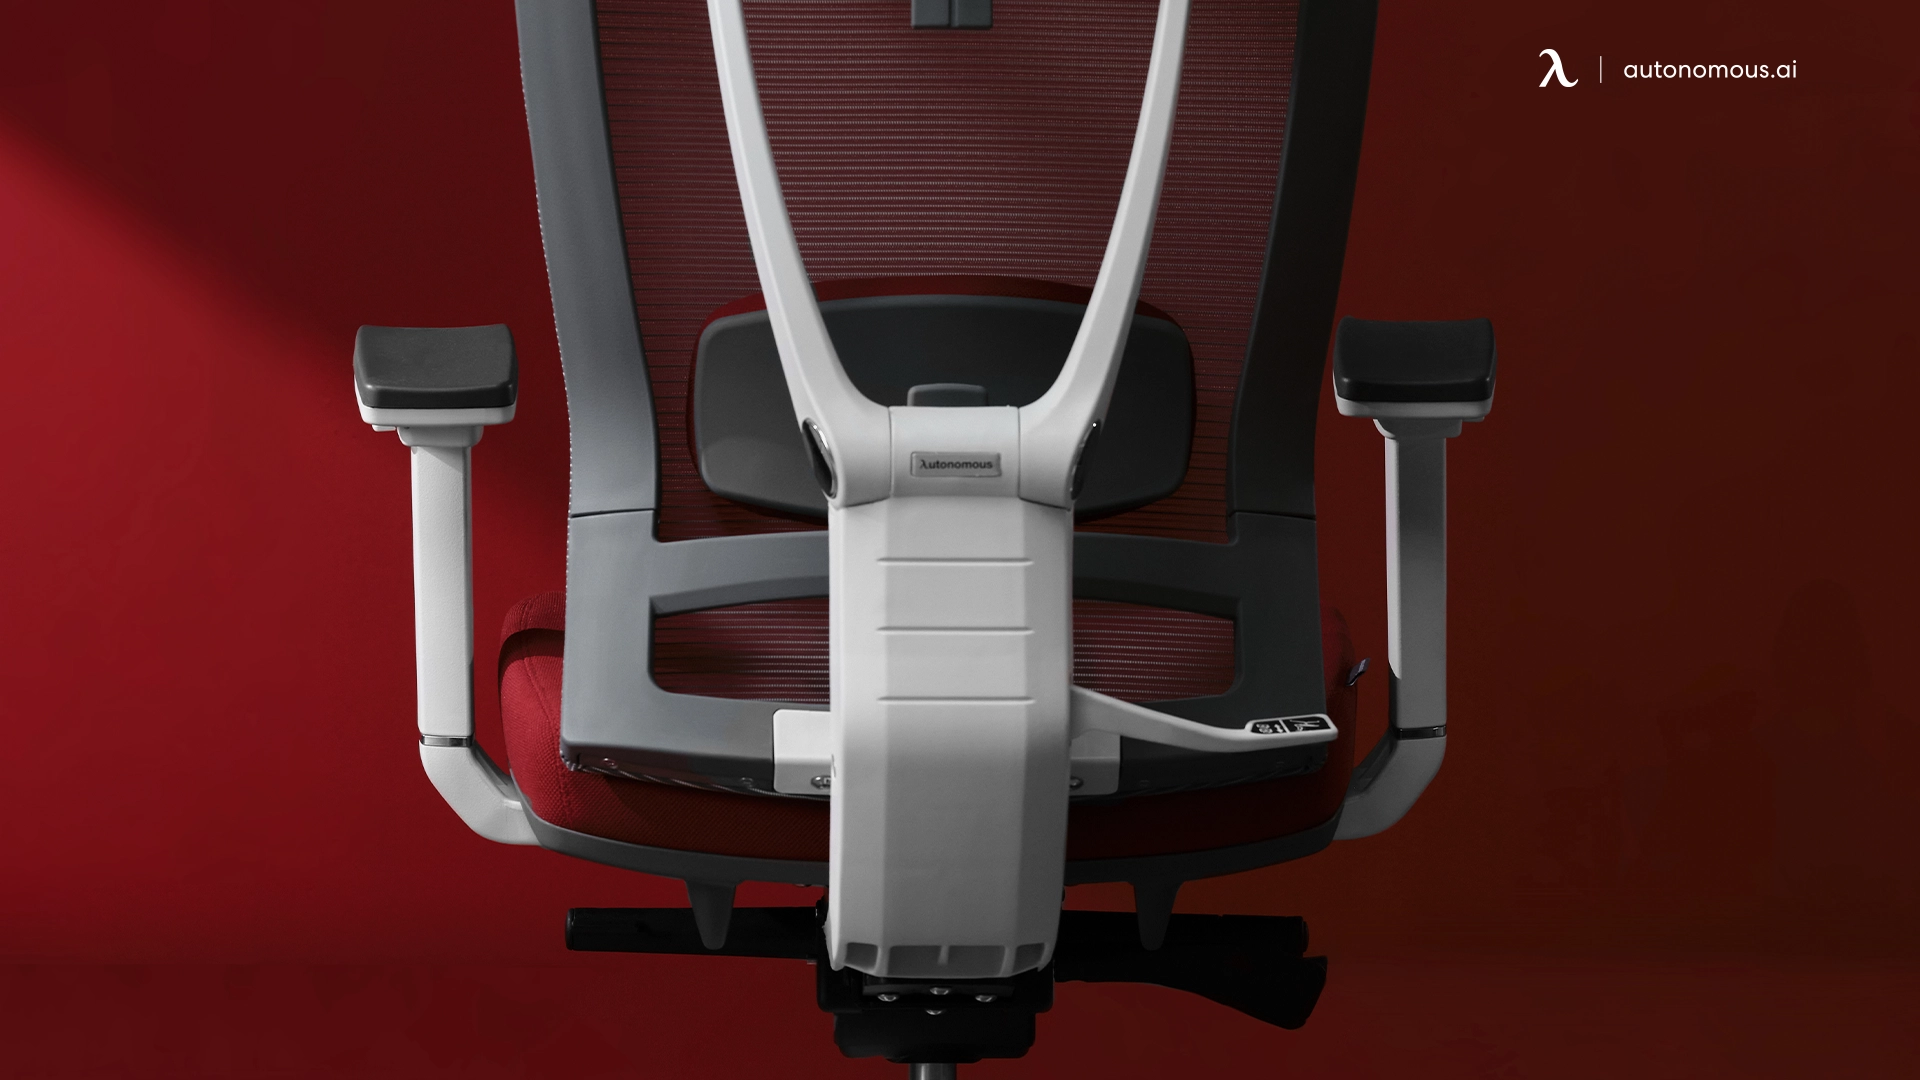 Why Do Good Office Chairs Cost So Much?